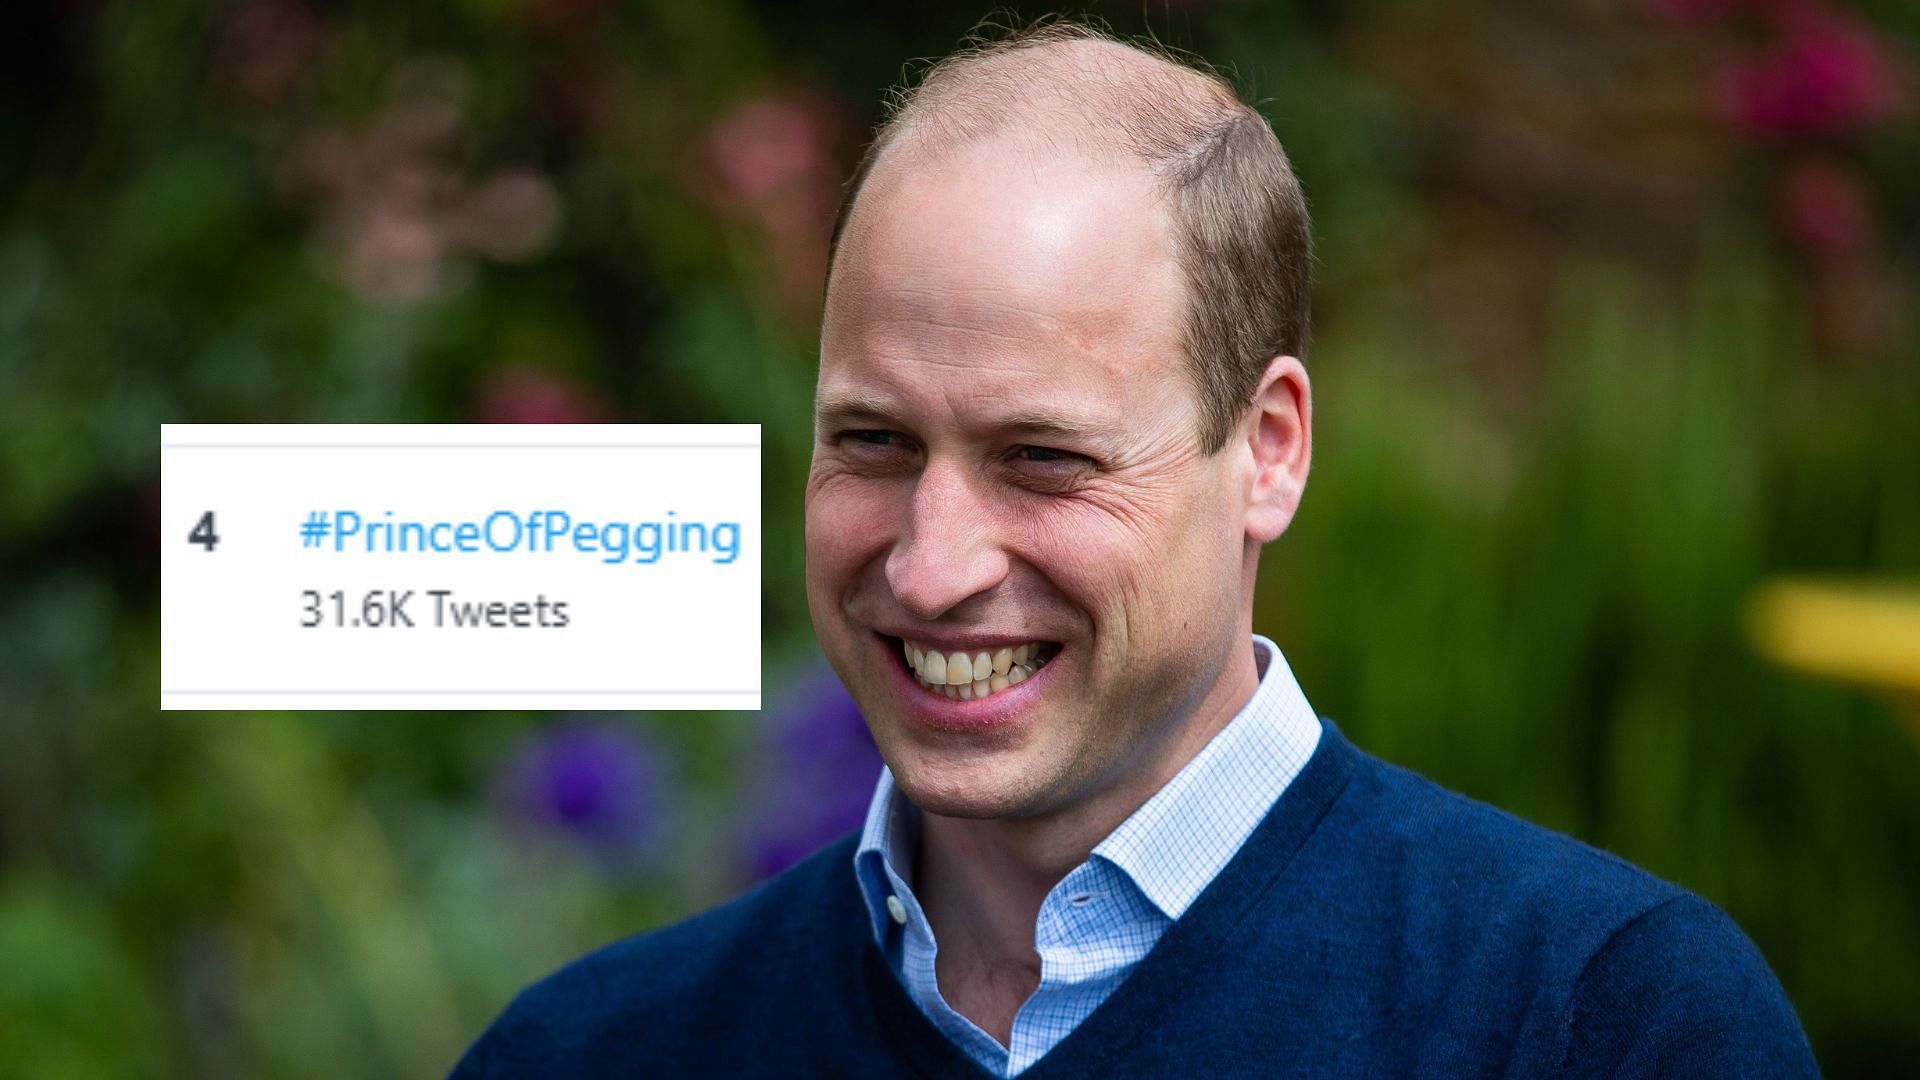 Prince Williams trend along with #PrinceofPegging (Image via WPA Pool/Getty Images)